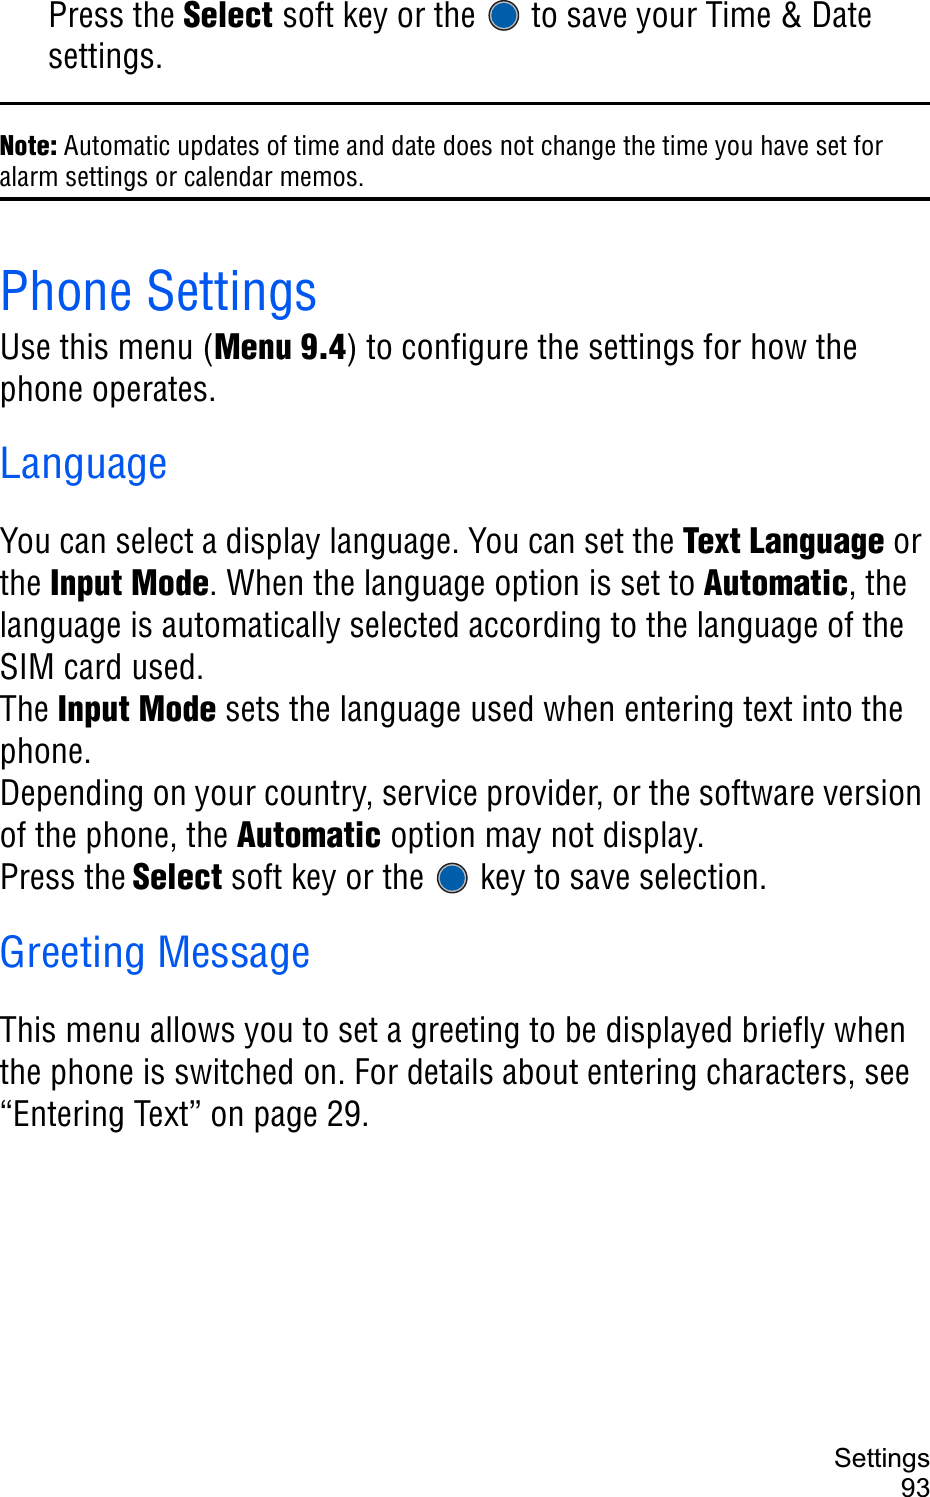 Settings93Press the Select soft key or the   to save your Time &amp; Date settings.Note: Automatic updates of time and date does not change the time you have set for alarm settings or calendar memos.Phone SettingsUse this menu (Menu 9.4) to configure the settings for how the phone operates.LanguageYou can select a display language. You can set the Text Language or the Input Mode. When the language option is set to Automatic, the language is automatically selected according to the language of the SIM card used.The Input Mode sets the language used when entering text into the phone.Depending on your country, service provider, or the software version of the phone, the Automatic option may not display.Press the Select soft key or the   key to save selection.Greeting MessageThis menu allows you to set a greeting to be displayed briefly when the phone is switched on. For details about entering characters, see “Entering Text” on page 29.